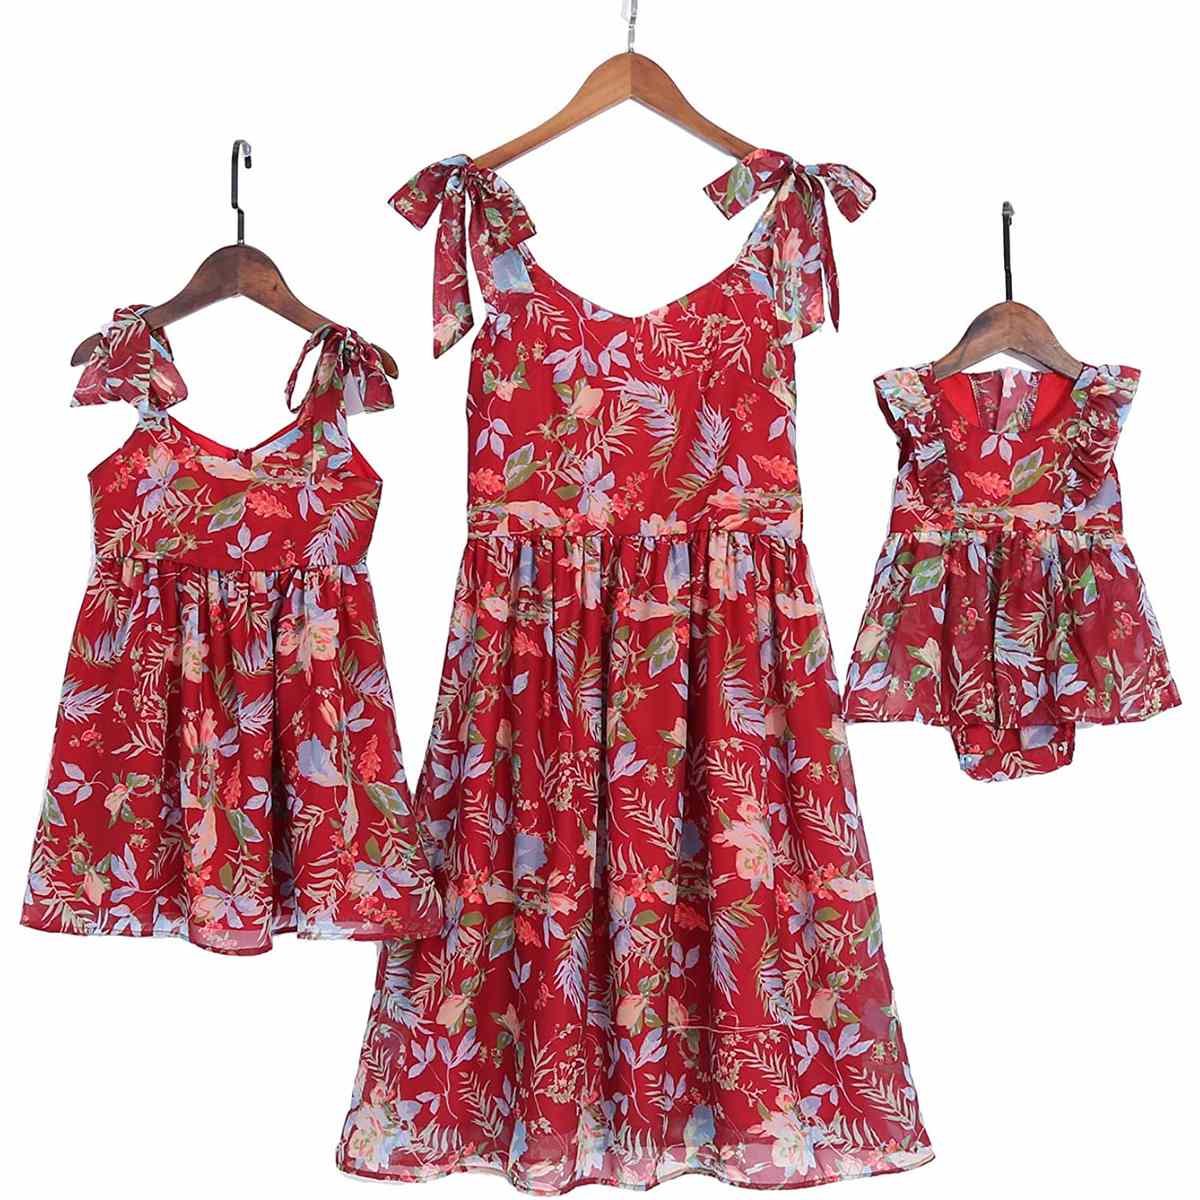 PopReal Mommy and Me Floral Printed Dresses